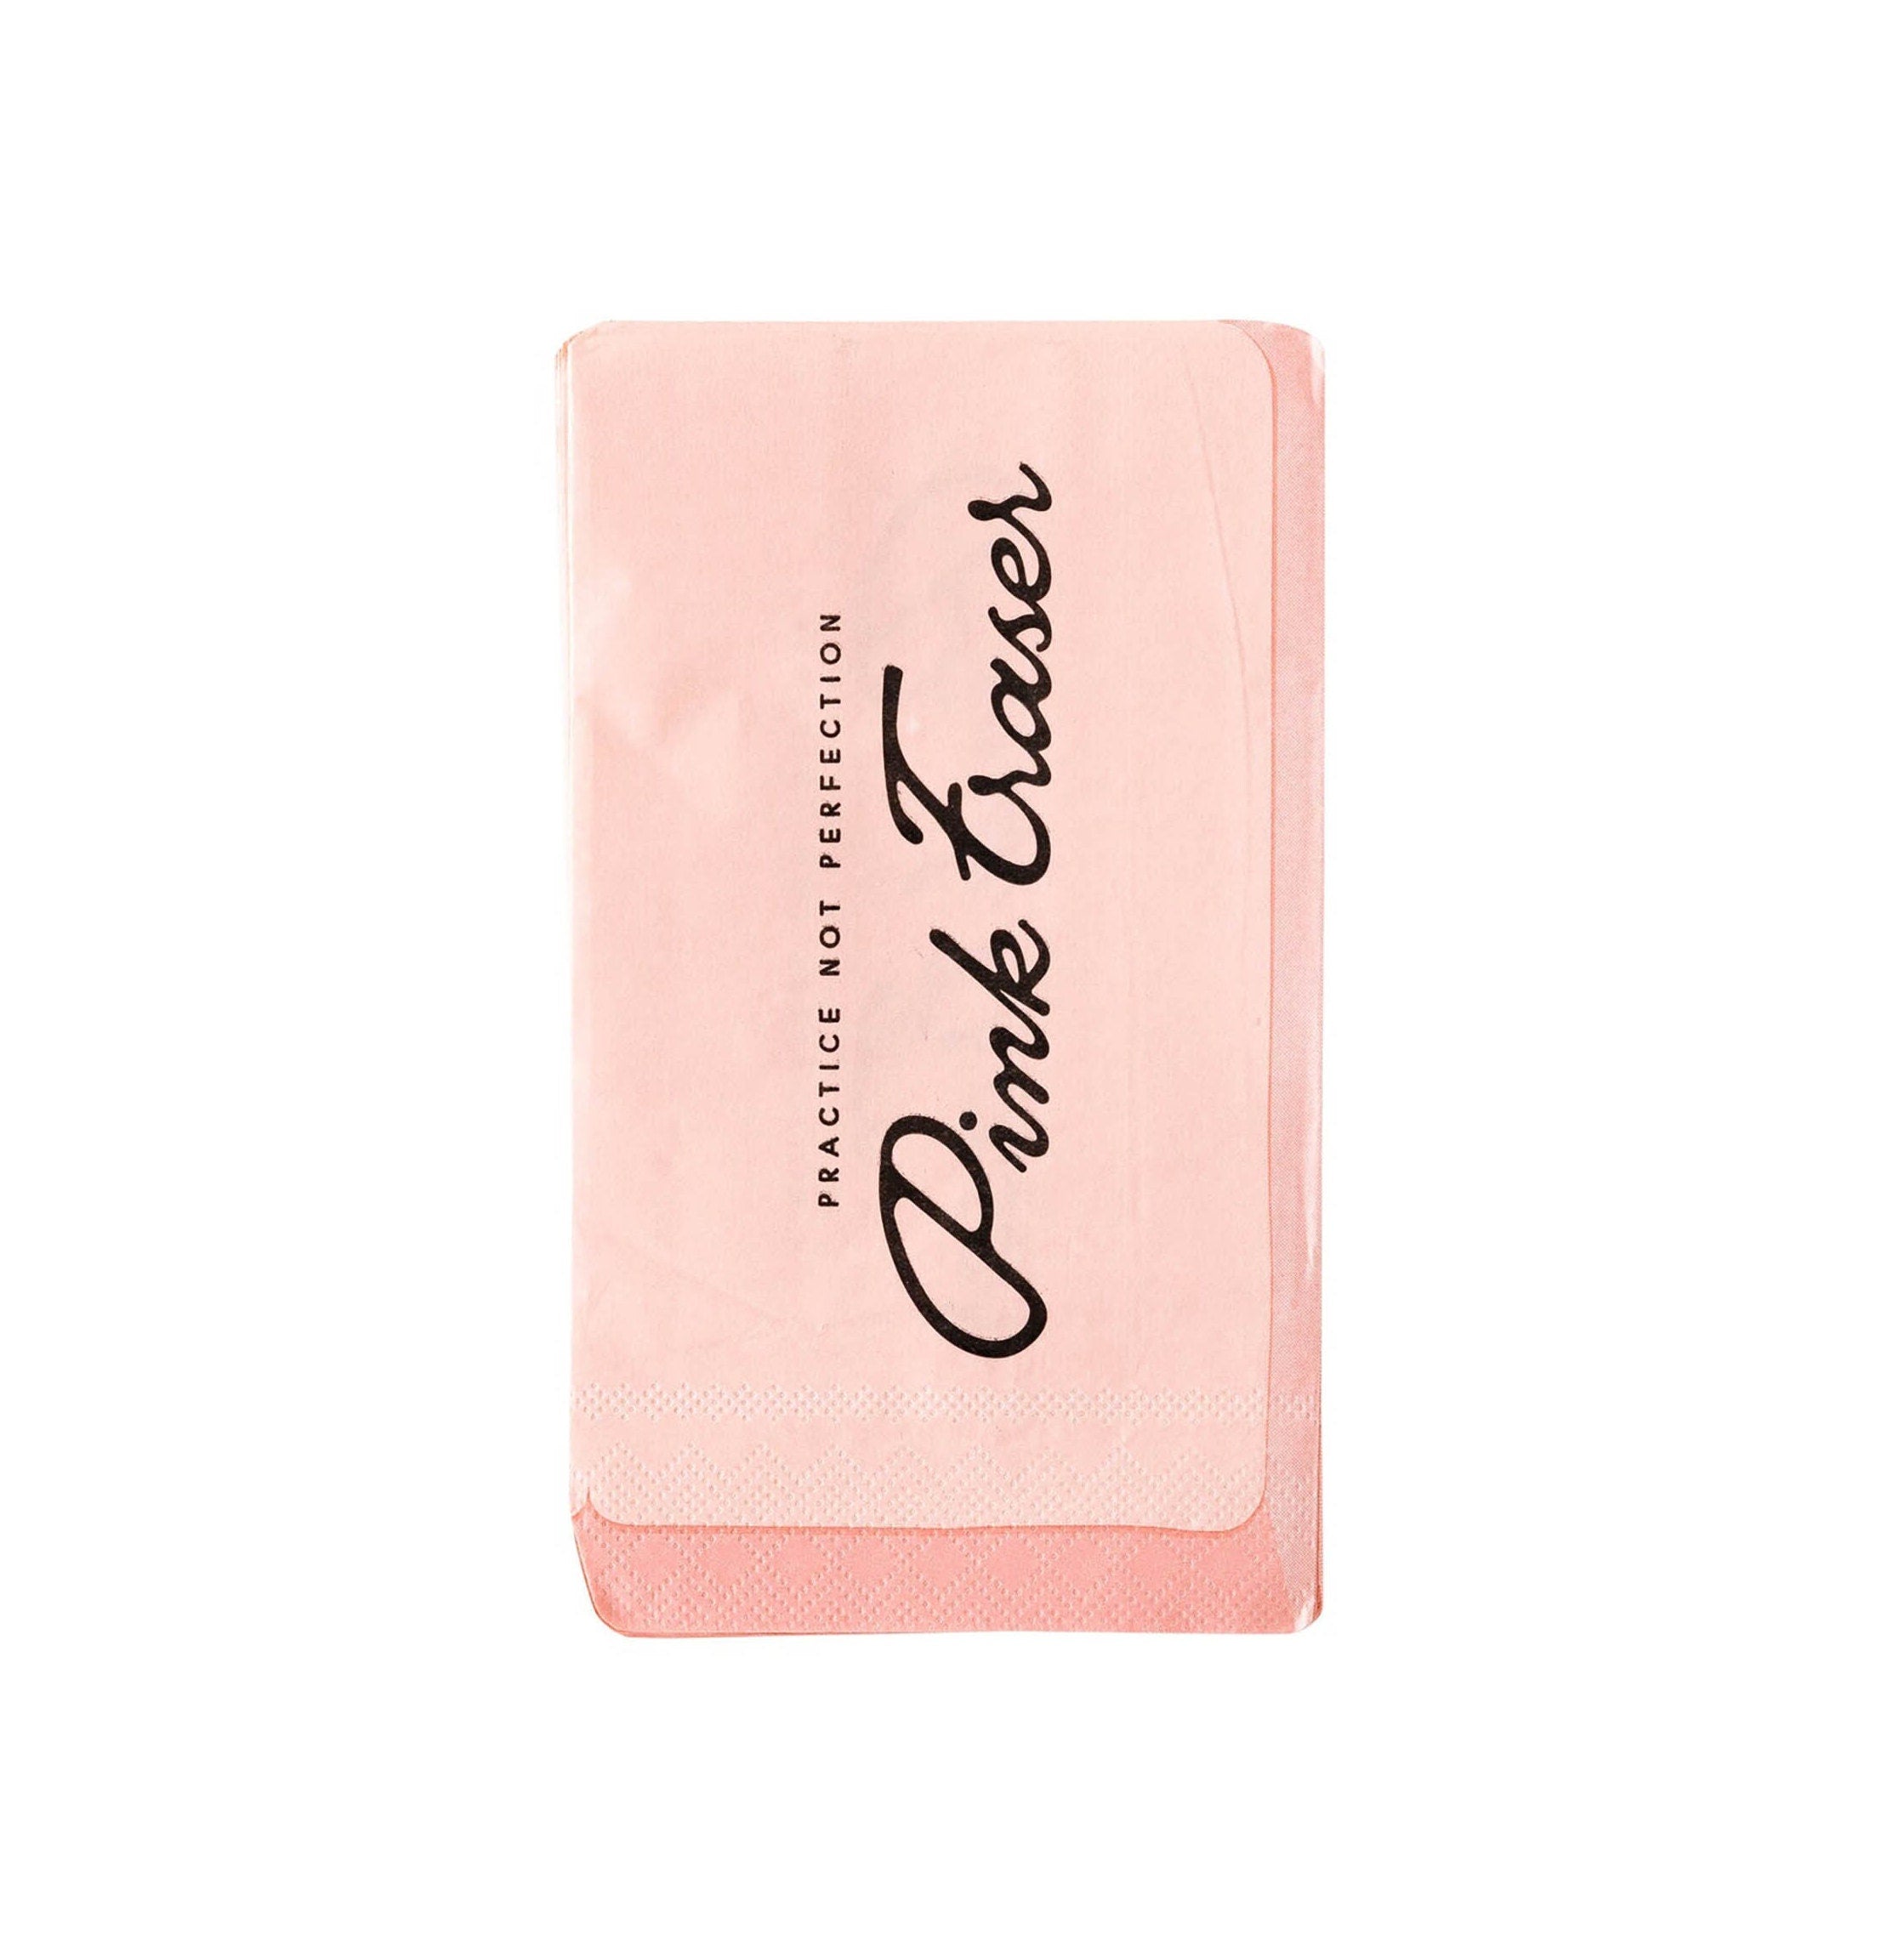 Pink Eraser - Paper Napkins - Back to School Party Ideas - Back to School Party - Graduation Napkins - Office Party - Classroom Party